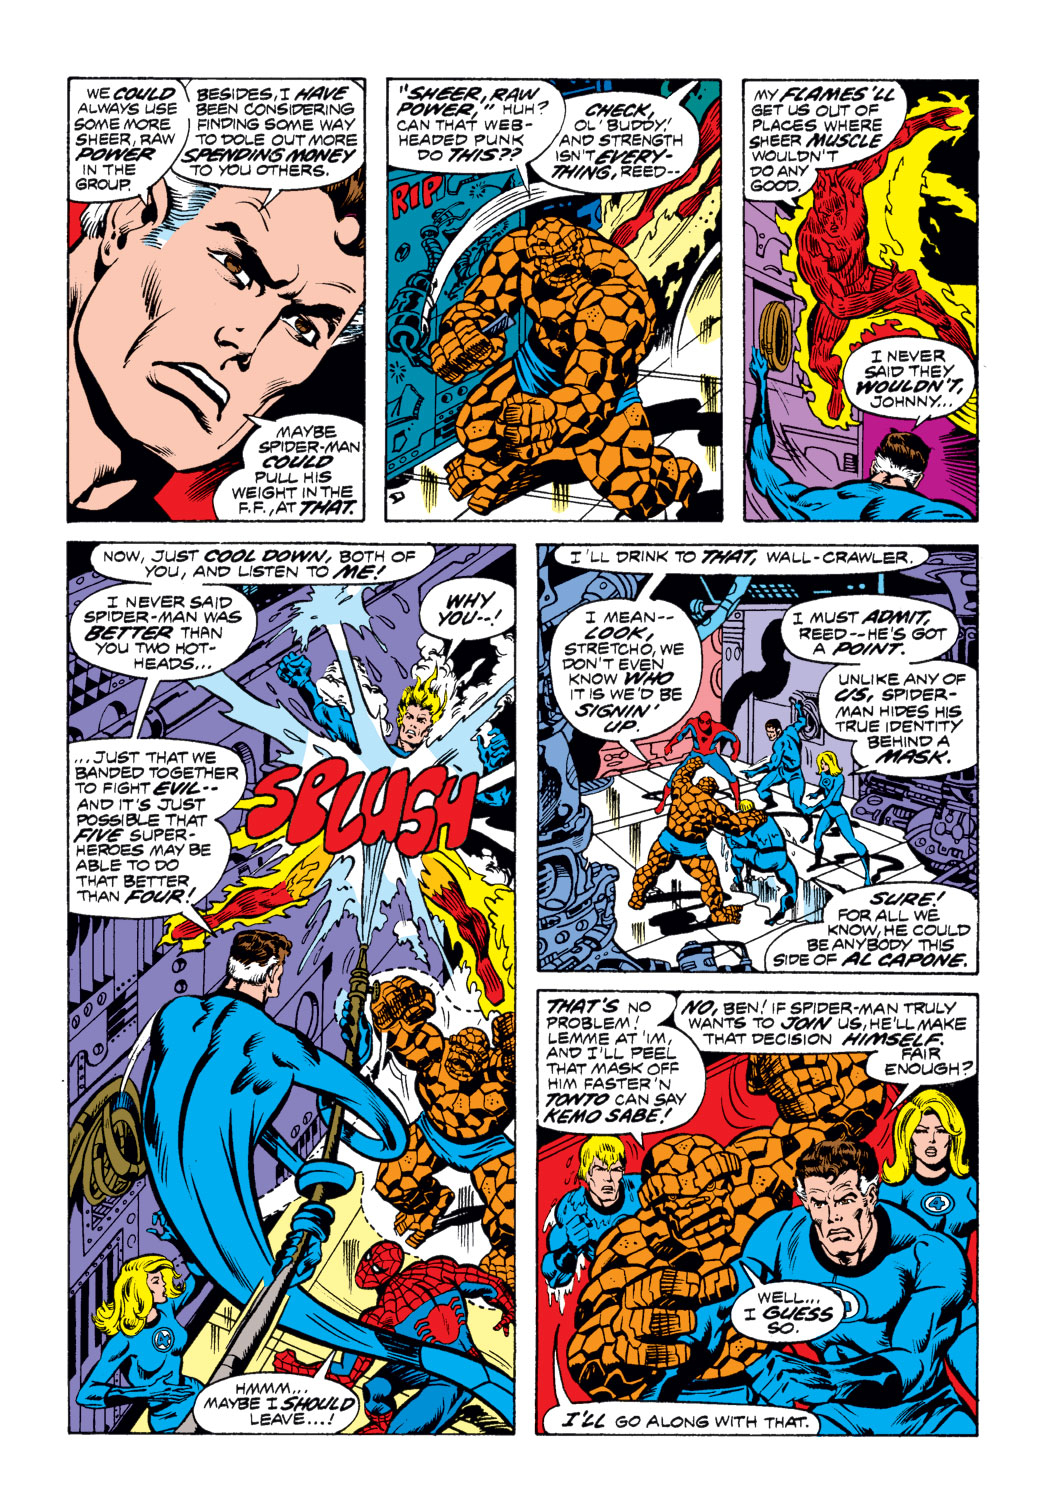 What If? (1977) issue 1 - Spider-Man joined the Fantastic Four - Page 11